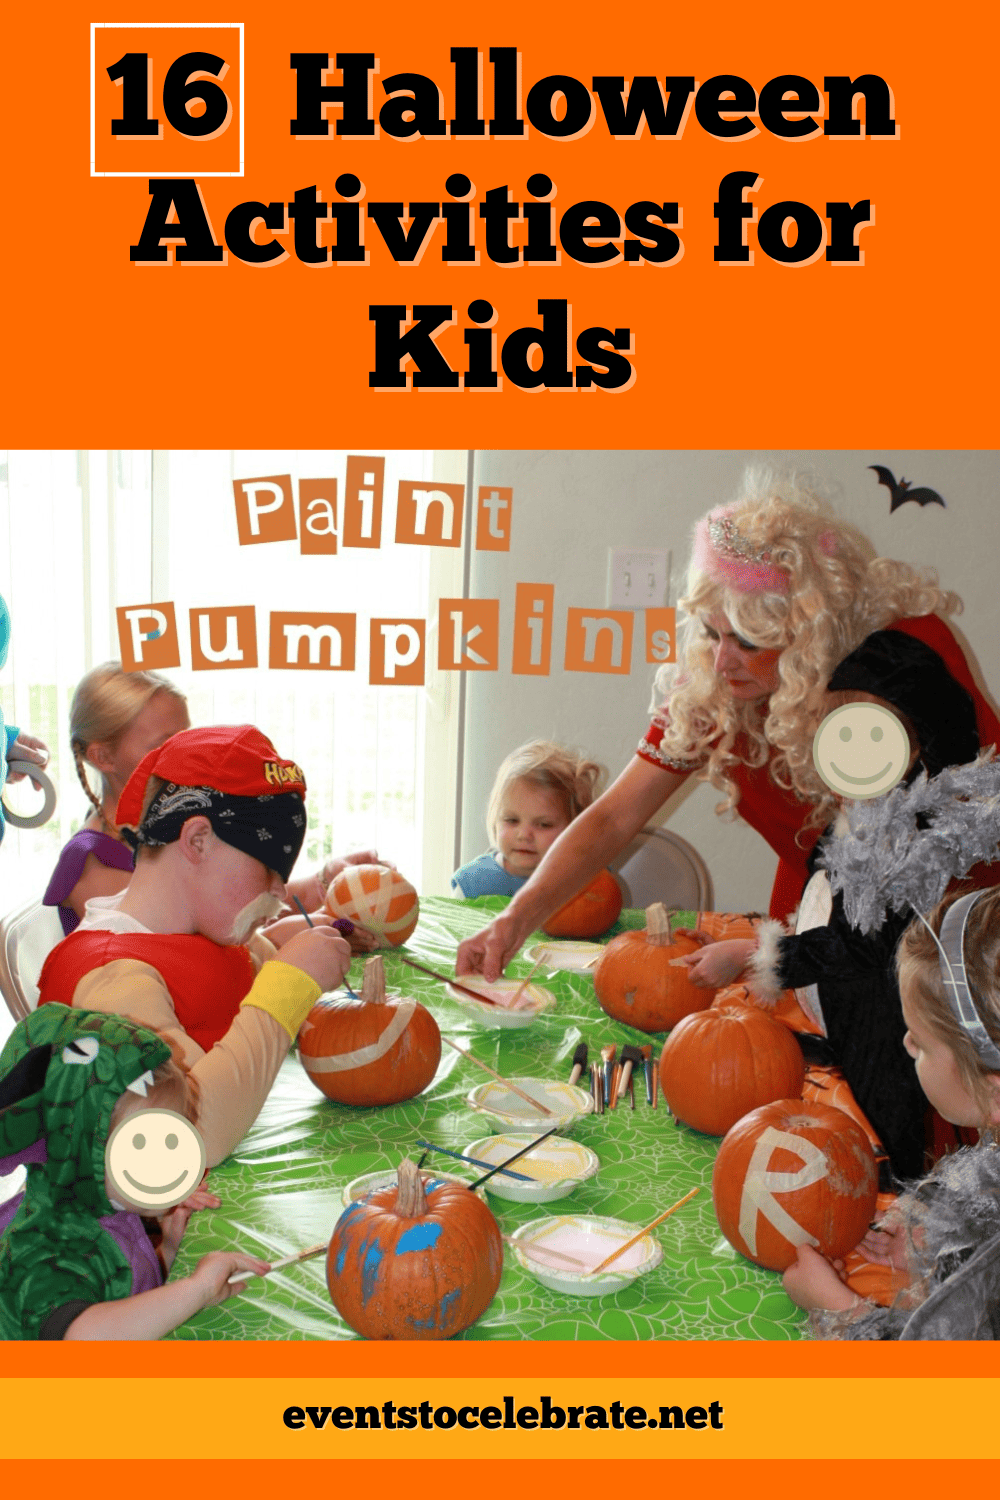 Halloween Party Activities for Kids - Party Ideas for Real People